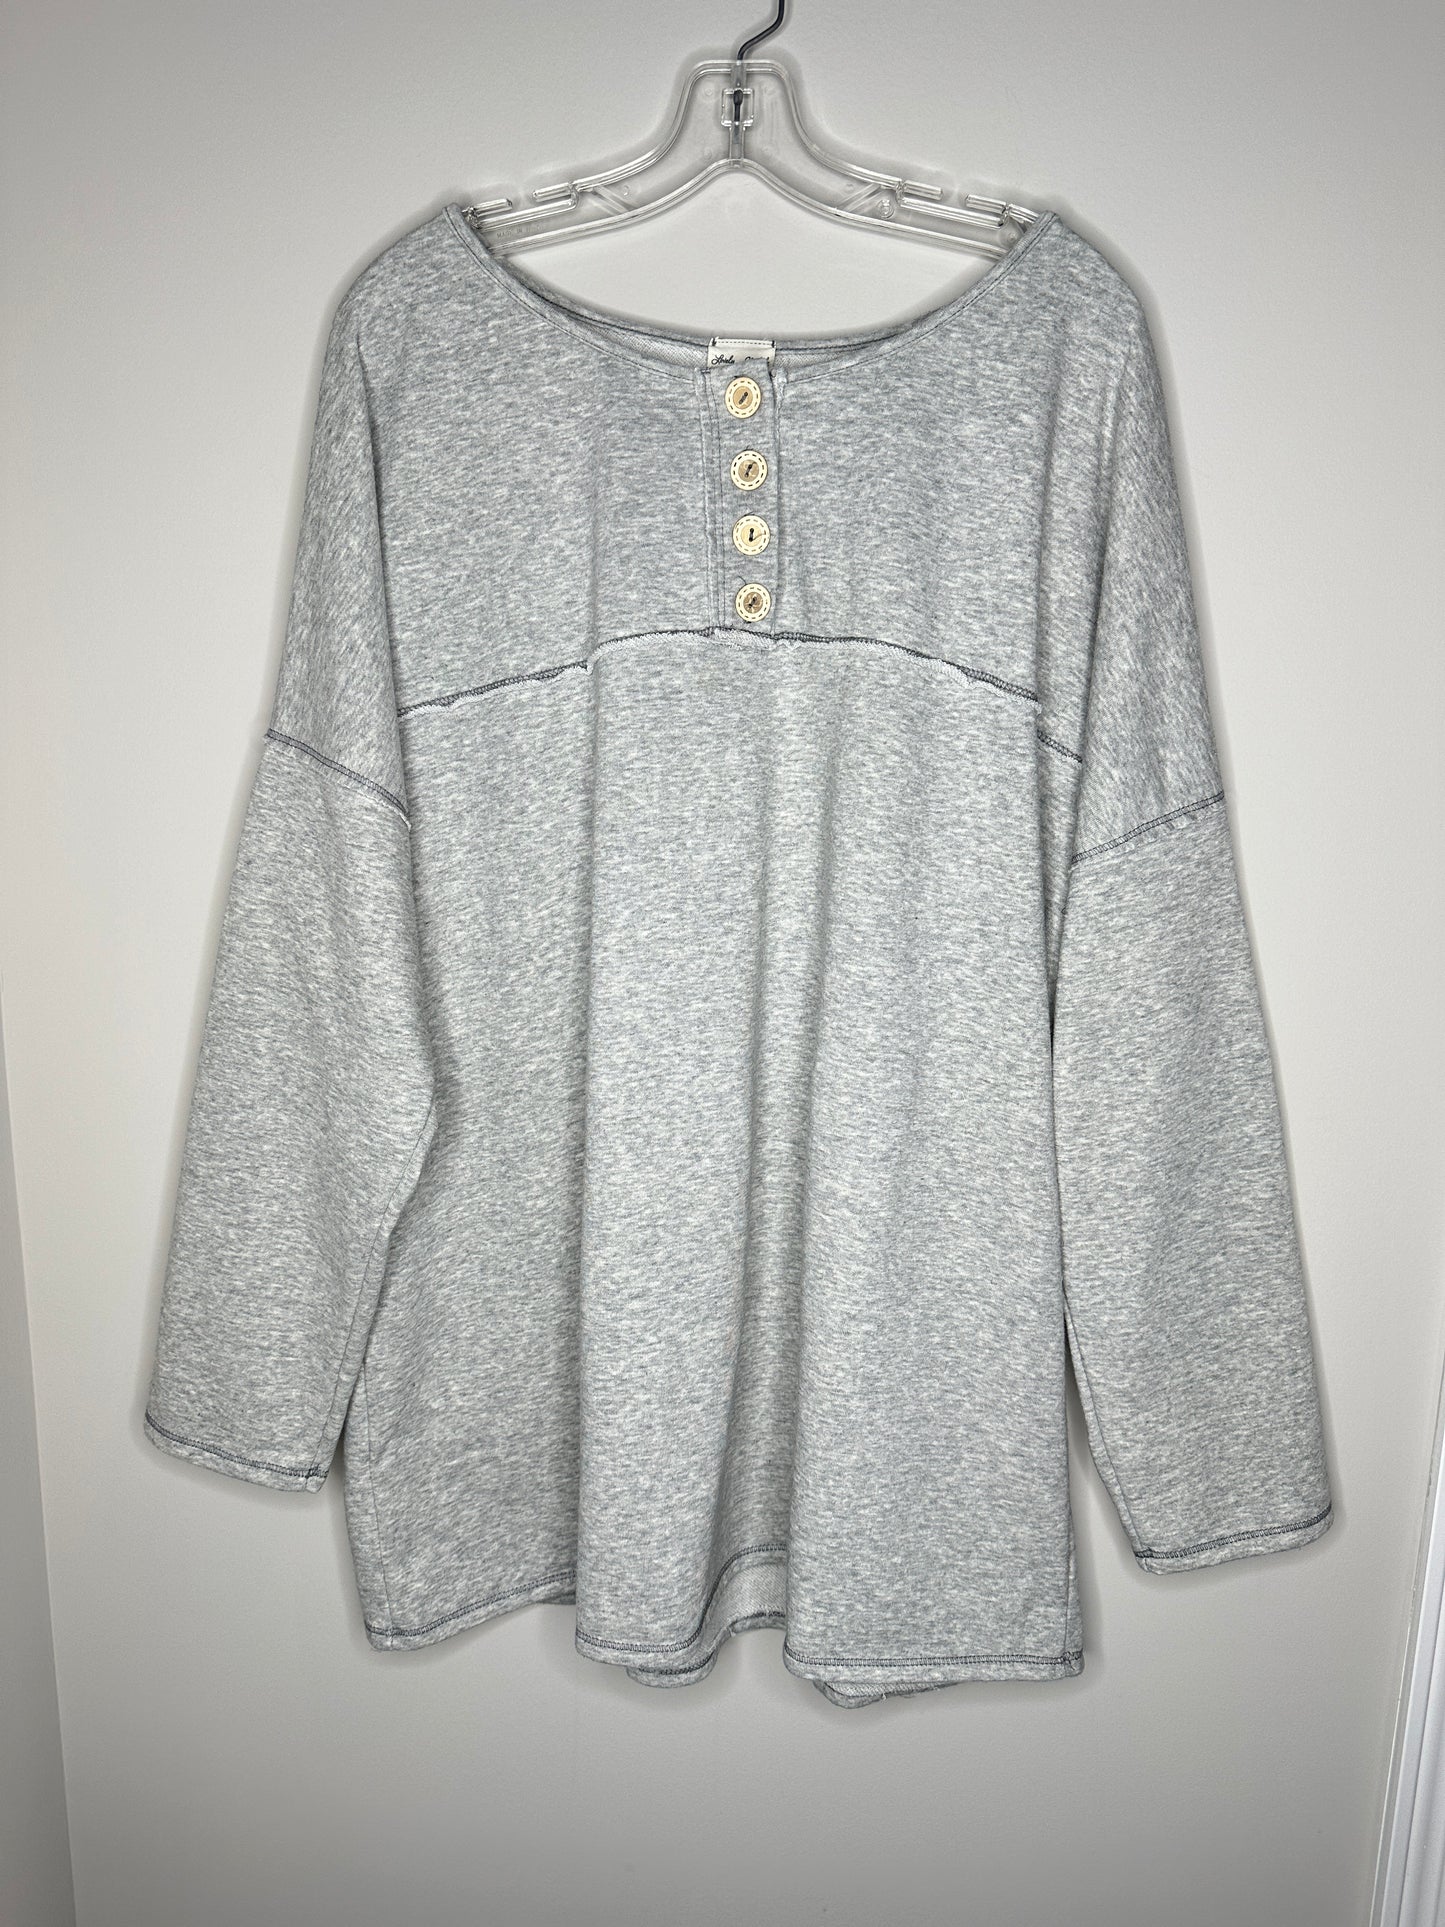 Lovely Melody Size 3XL Gray Fleece Sweater Top